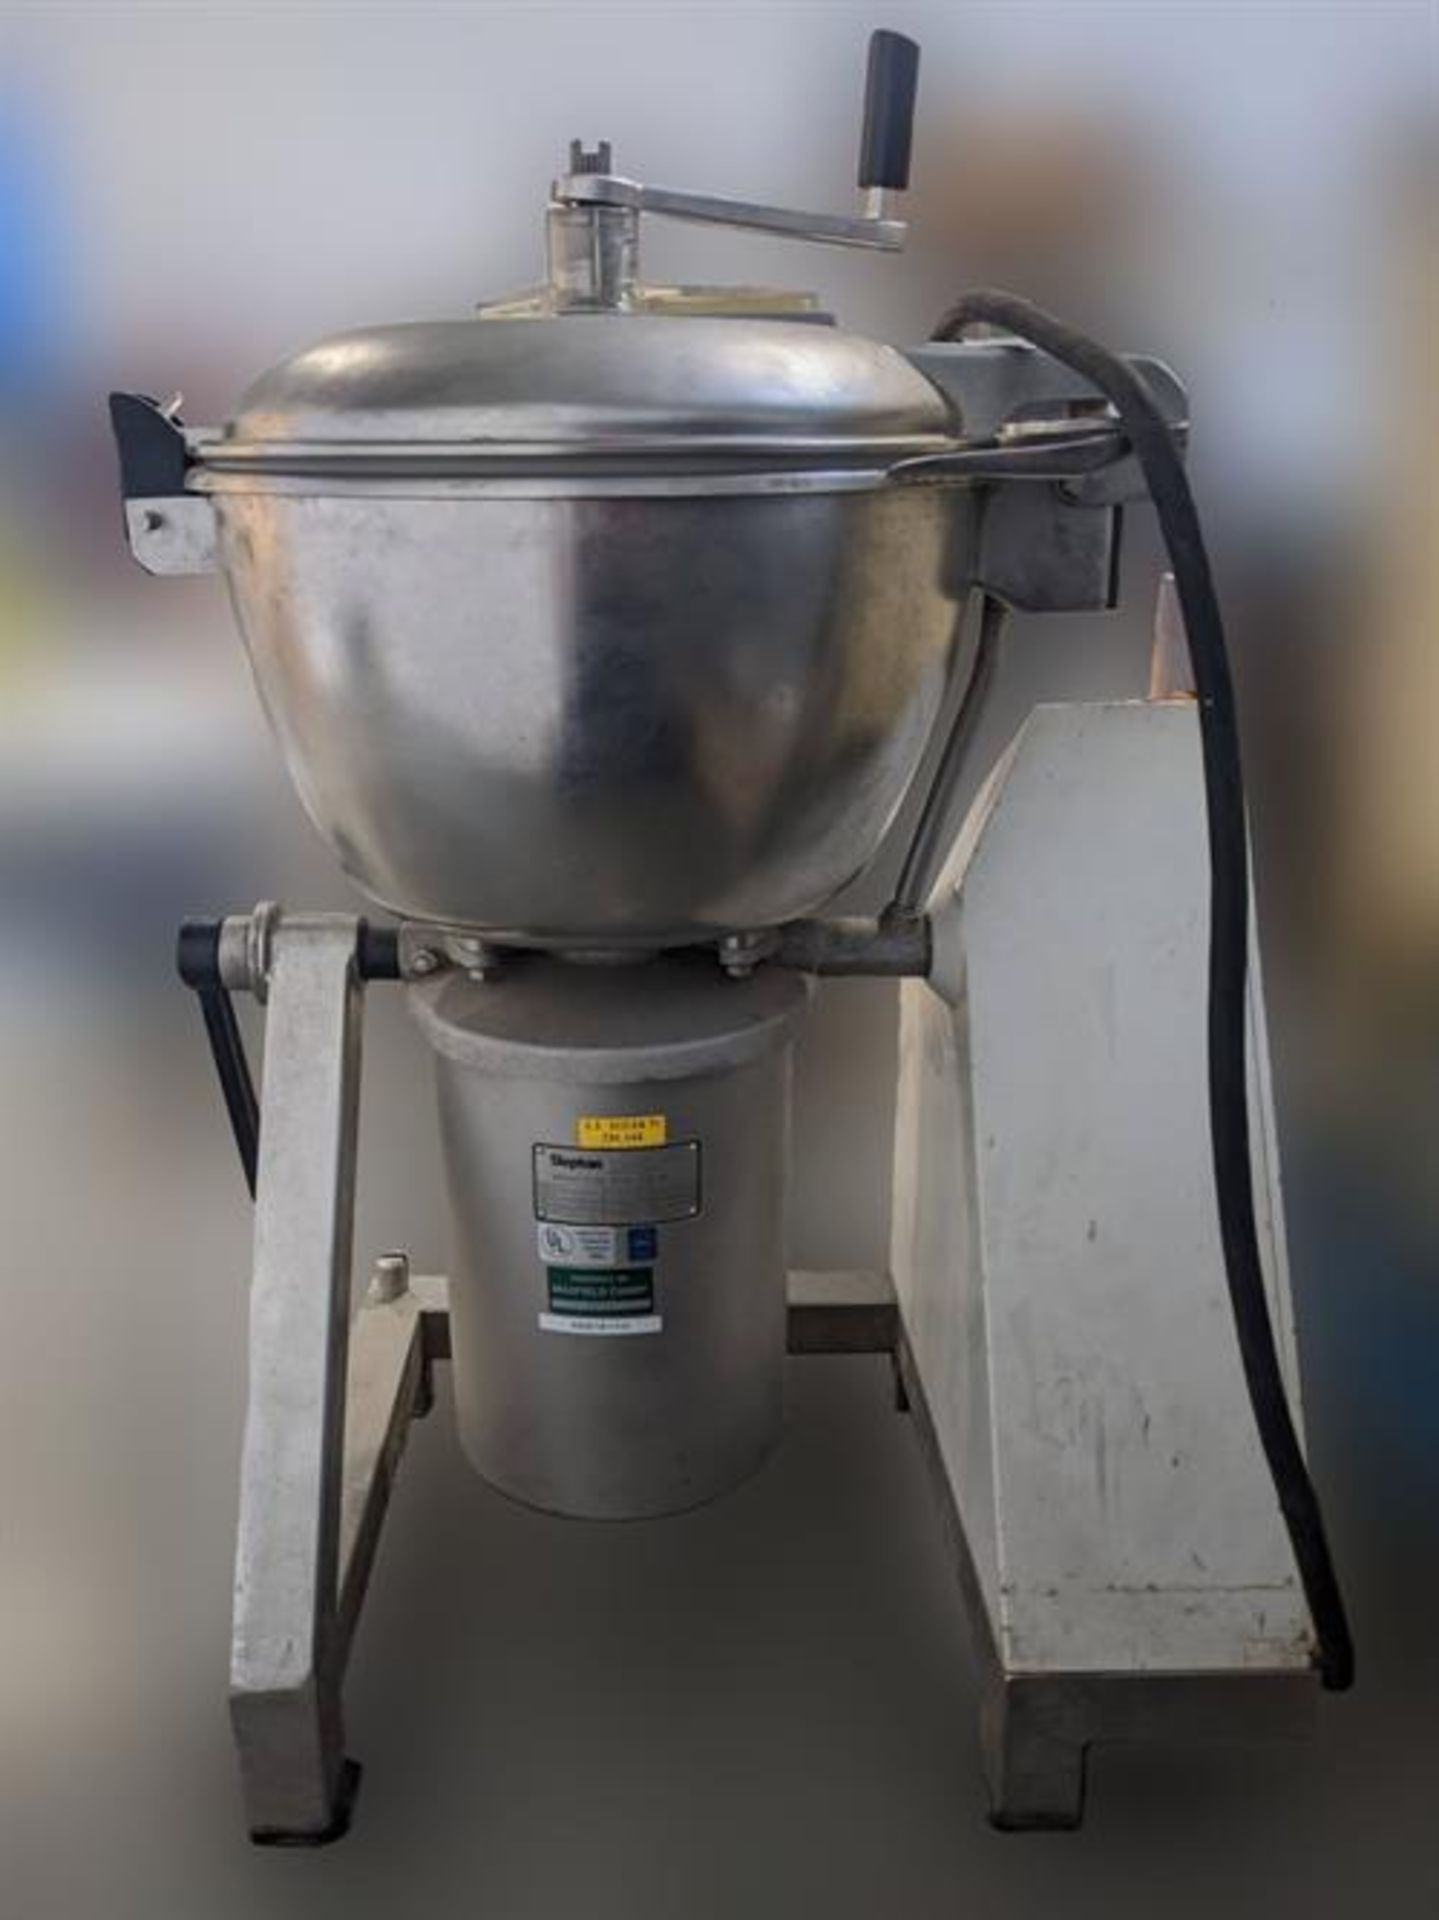 Stephan Model VCM44A Cutter Mixer - Model VCM44A - Serial number 716.097.04 - 44 liter capacity - - Image 4 of 9